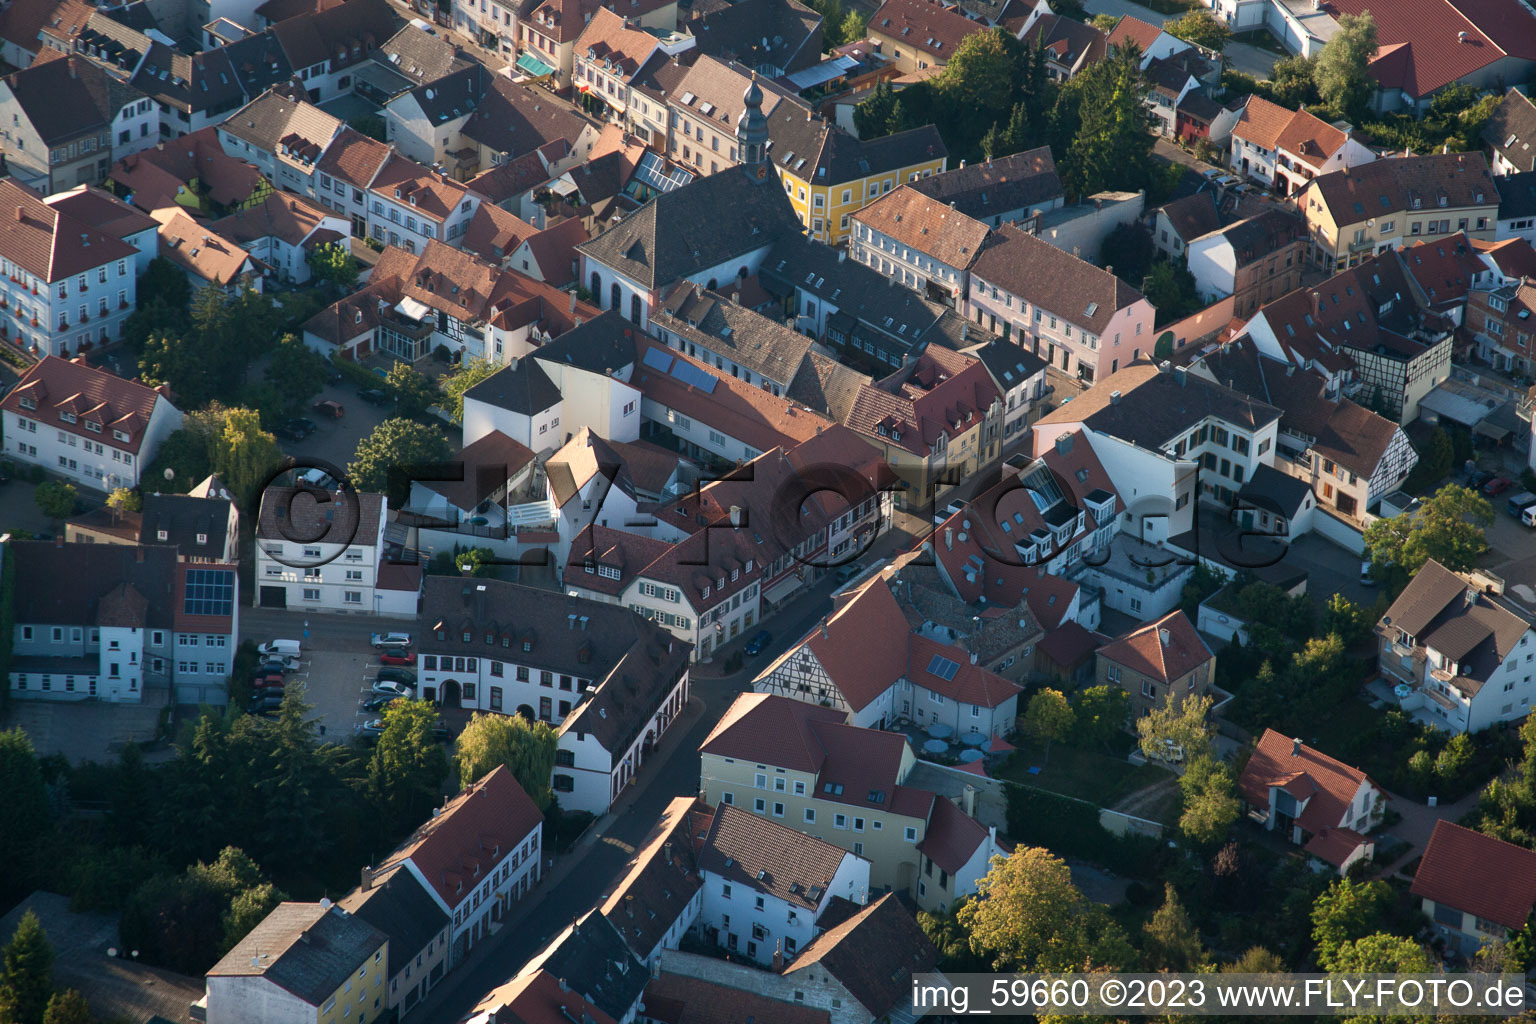 Germersheim in the state Rhineland-Palatinate, Germany from the drone perspective